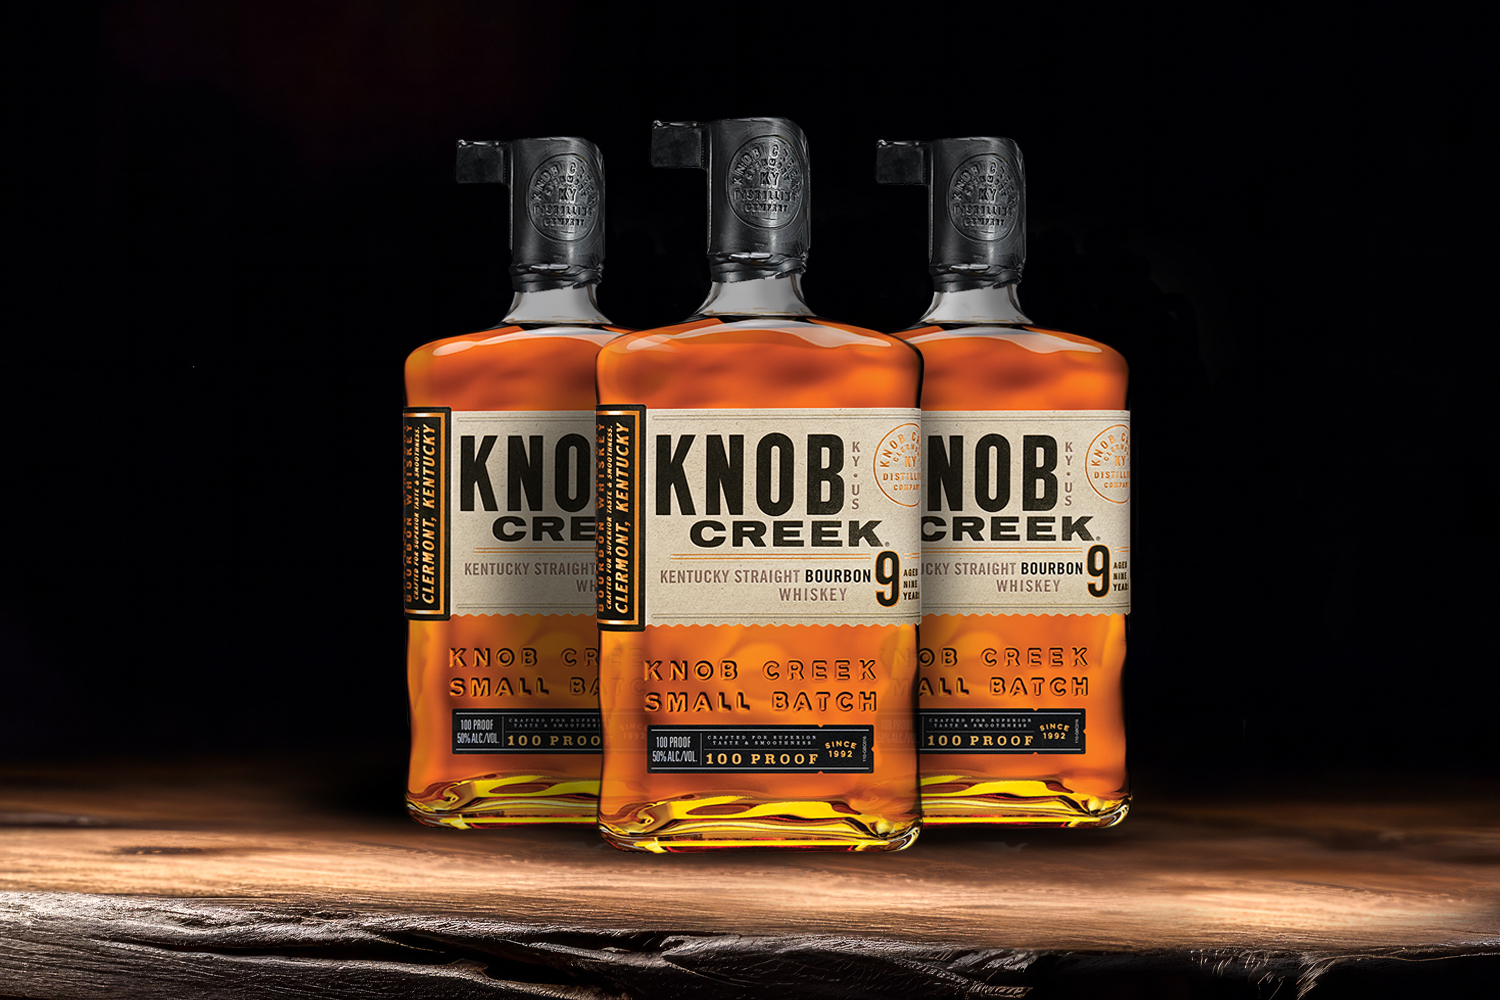 3 bottles of knob creek bourbon on a wooden table